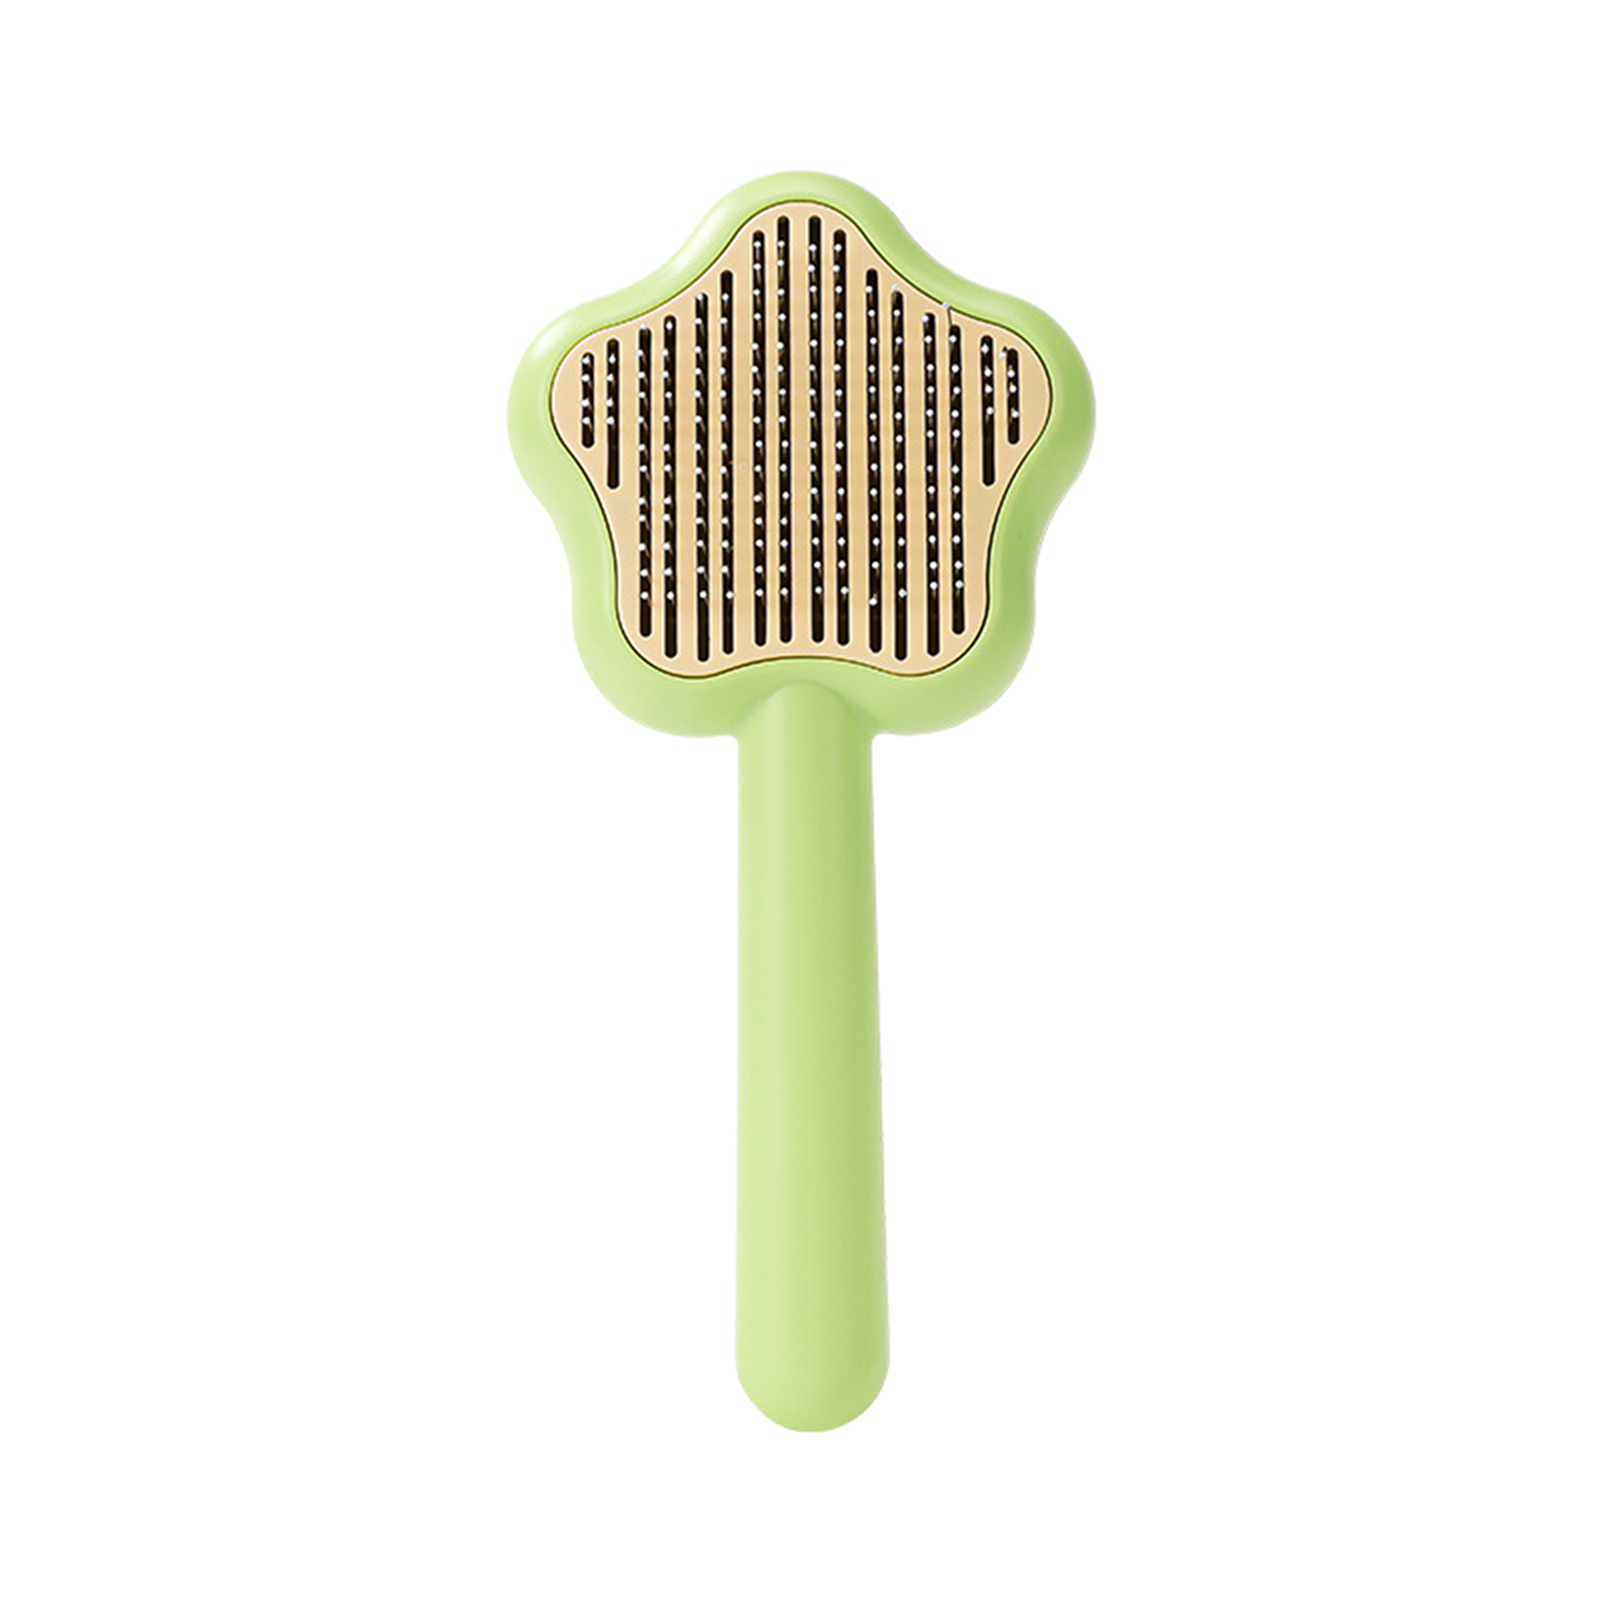 Multifunctional Shedding Brush With One-click Cleaning Button Perfect For Grooming Long Short Haired Dogs Cats (20 x 9.5 x 5cm)